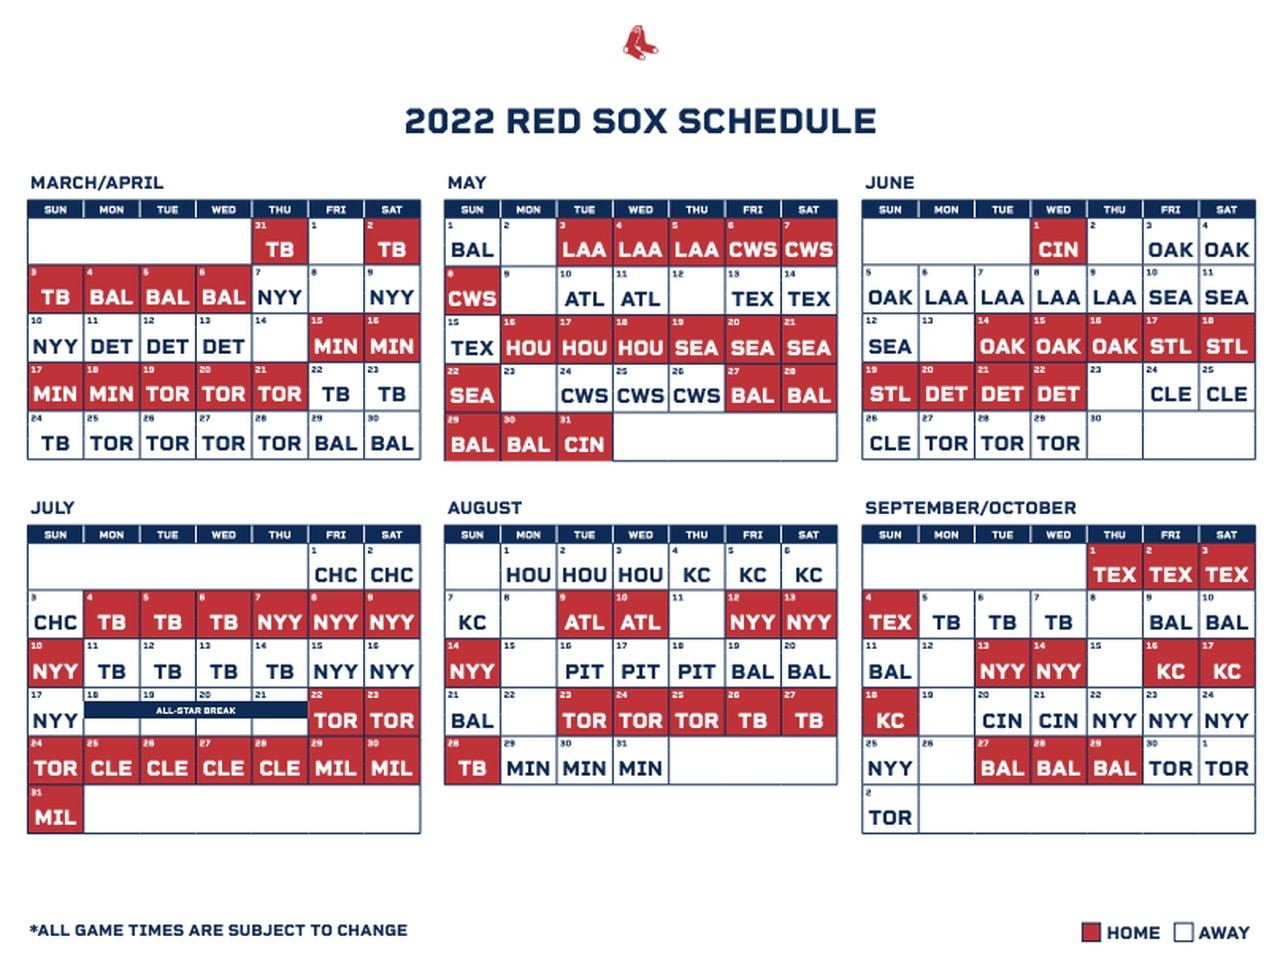 Boston Red Sox Release 2022 Schedule Opening Day Is March 